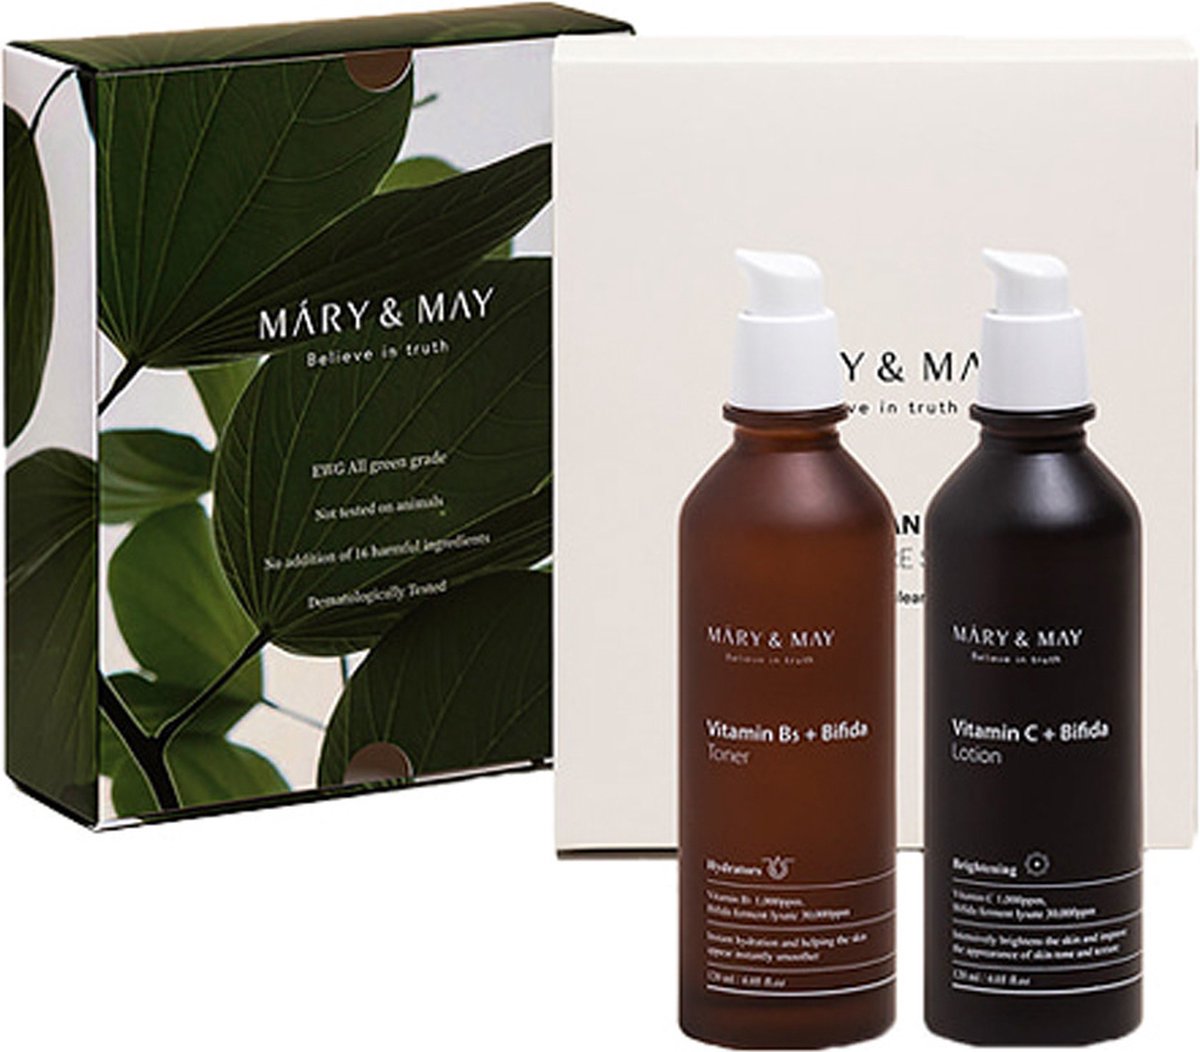 Mary & May Clean Skin Care Gift Set 2x 120ml